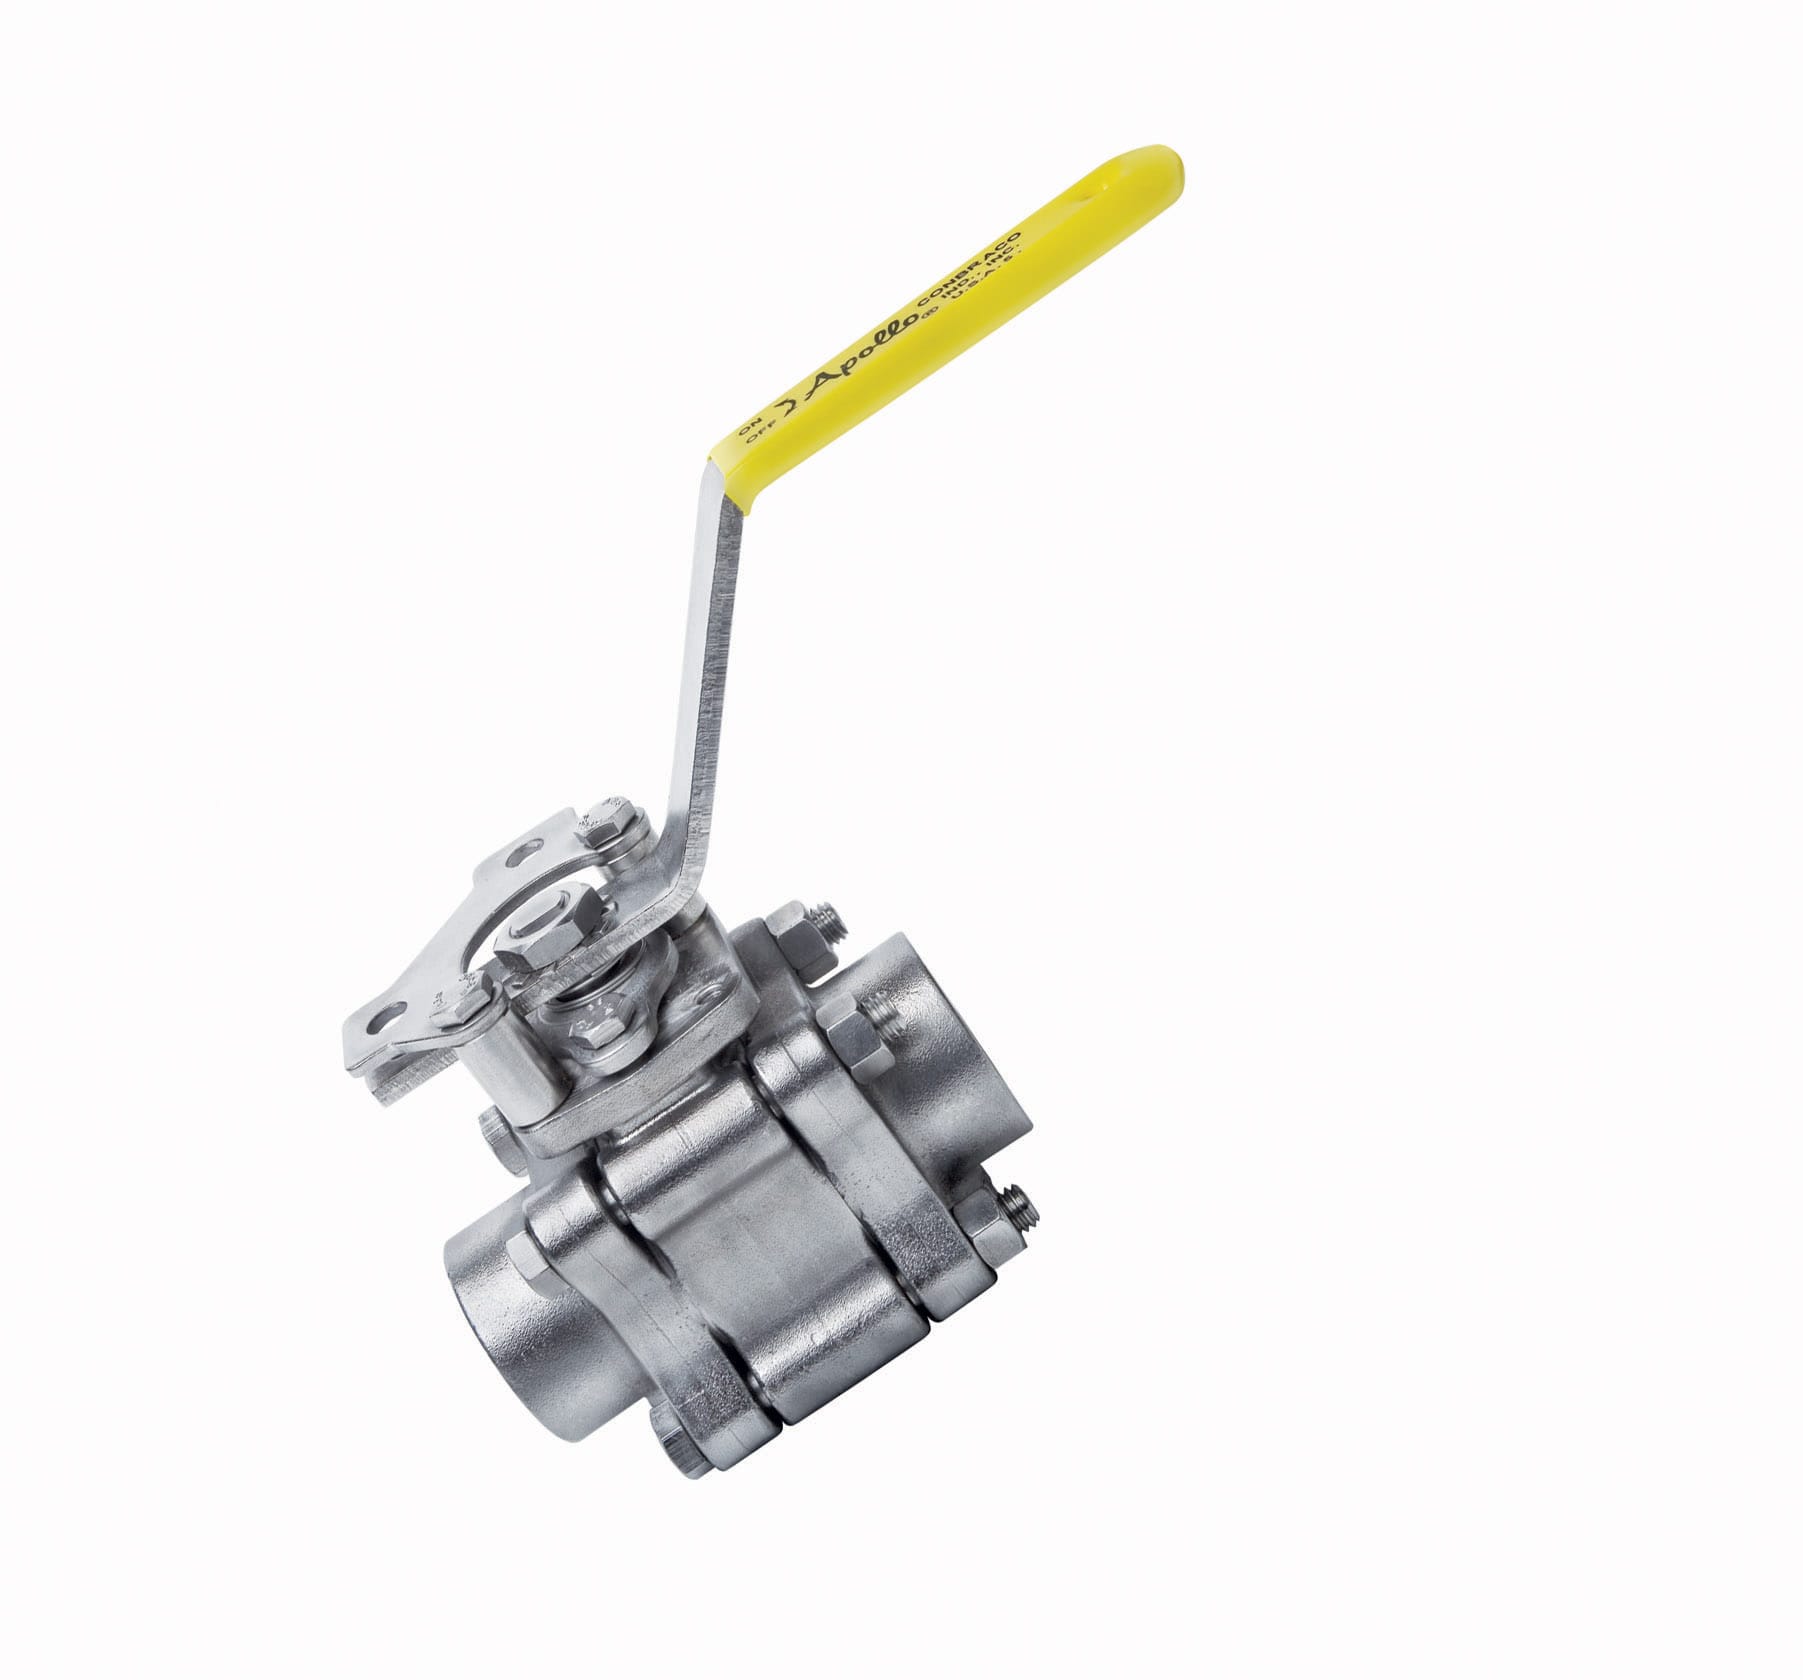 Ball Valve, Size 1/2 Inch NPT, 3 Pieces, Stainless Steel